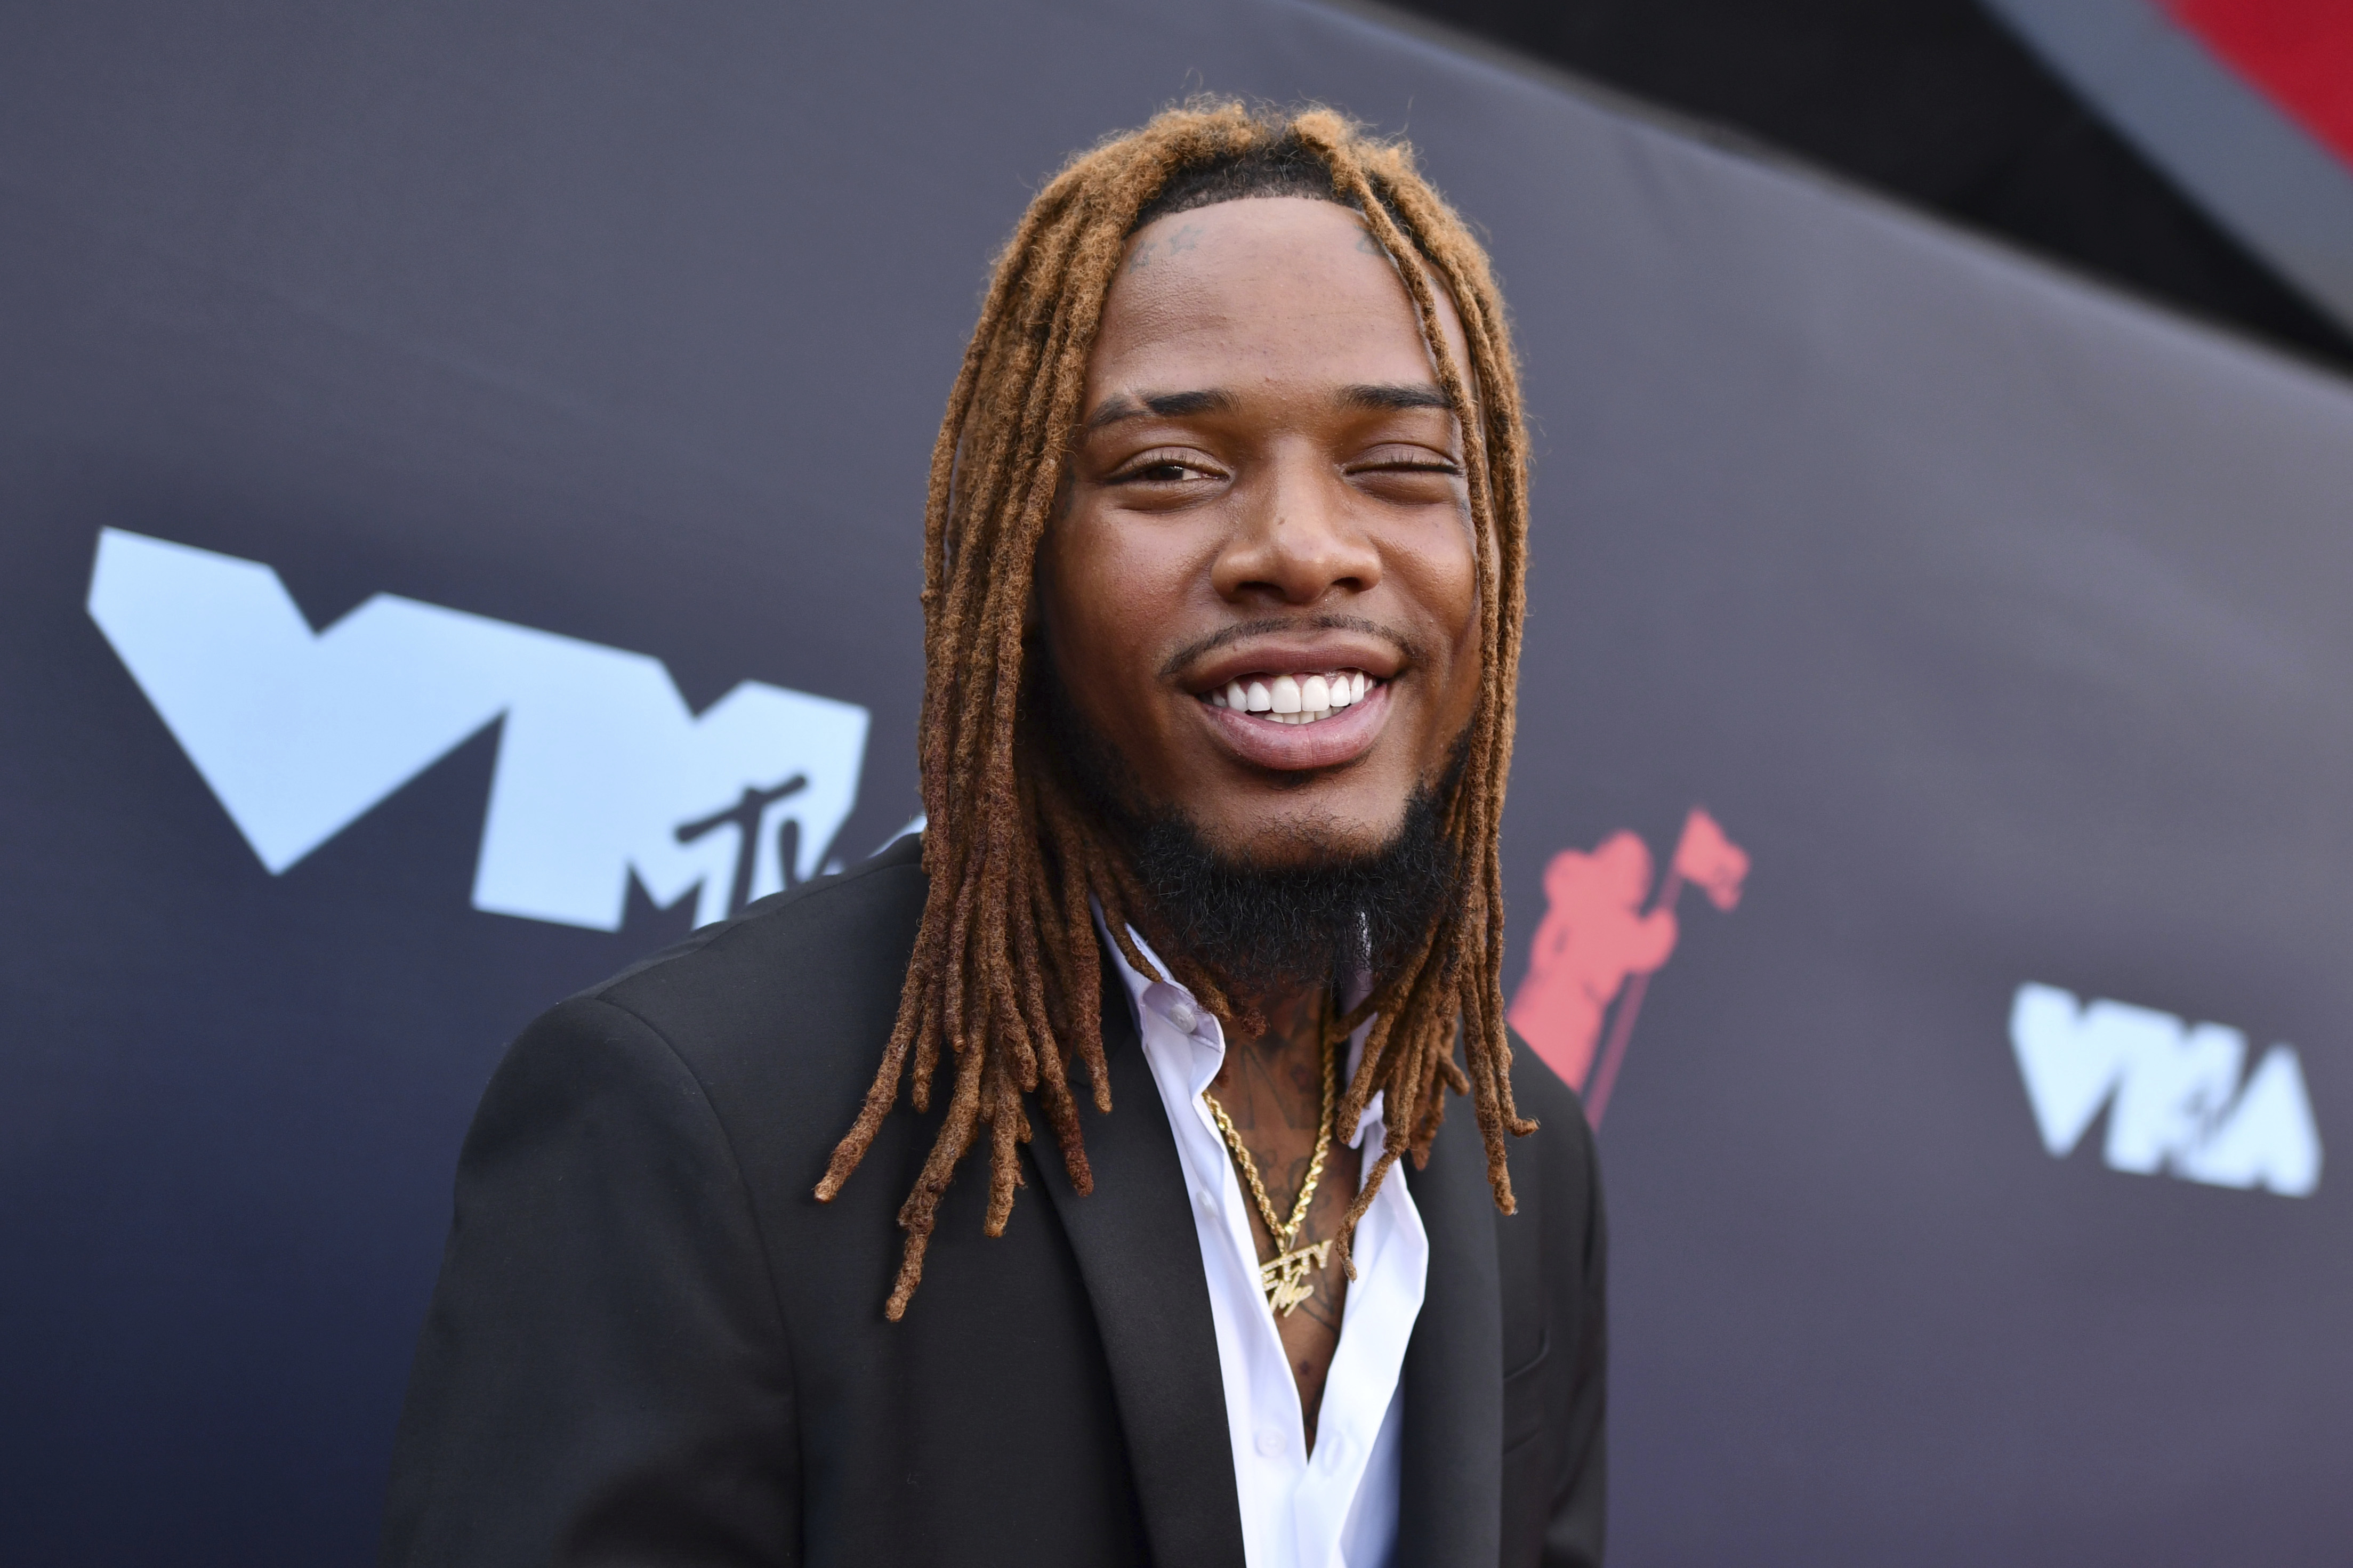 Rapper Fetty Wap indicted by FBI on drug trafficking conspiracy charge